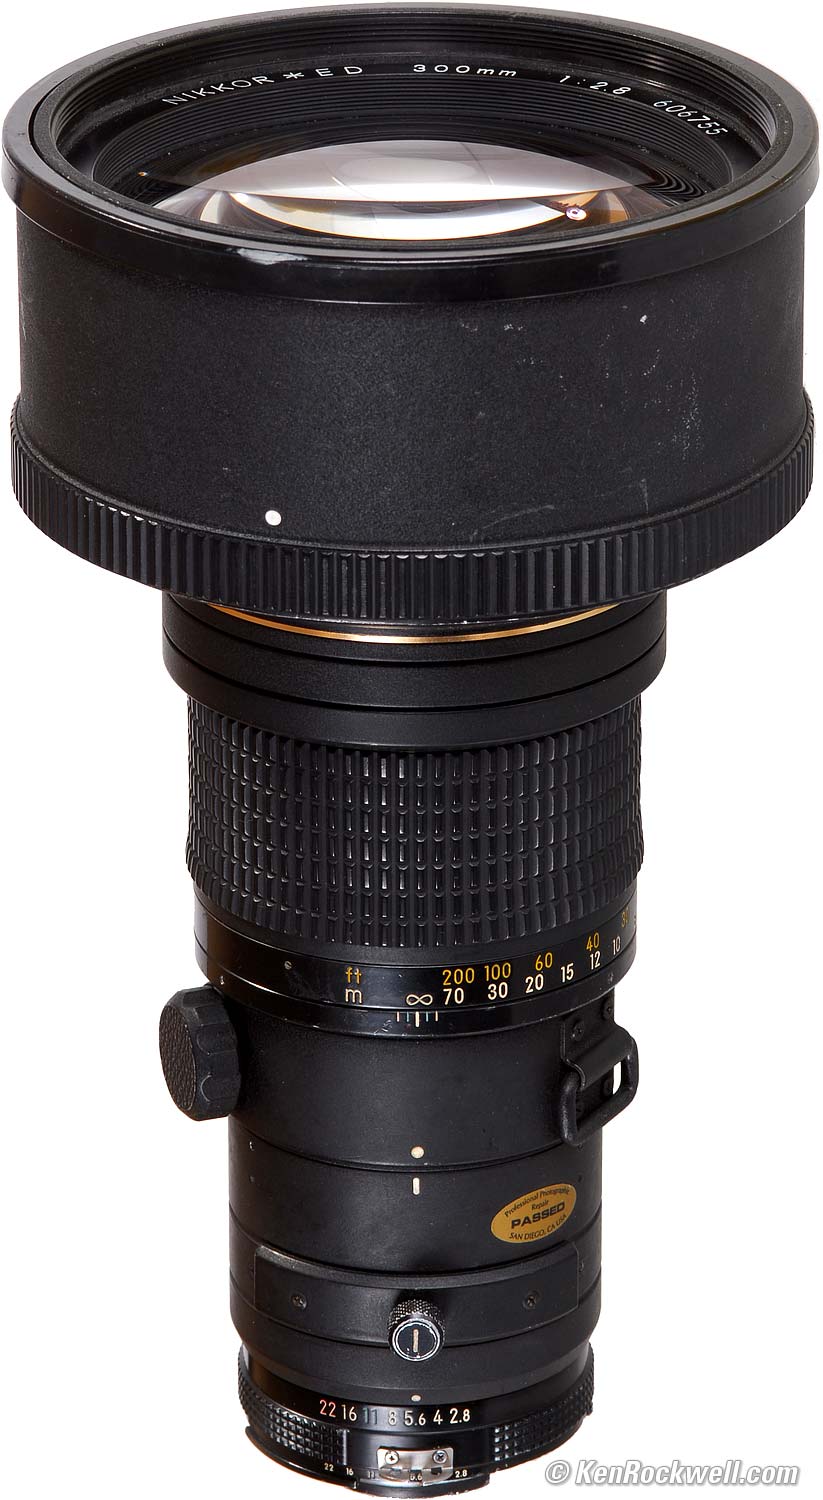 Nikon 300mm f/2.8 ED IF Review & Sample Images by Ken Rockwell